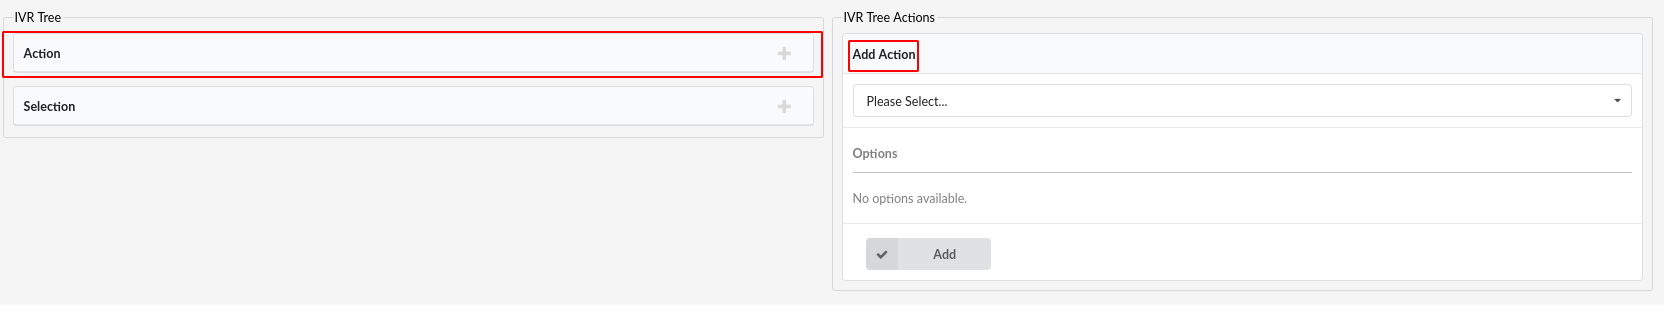 add-action-ivr.png